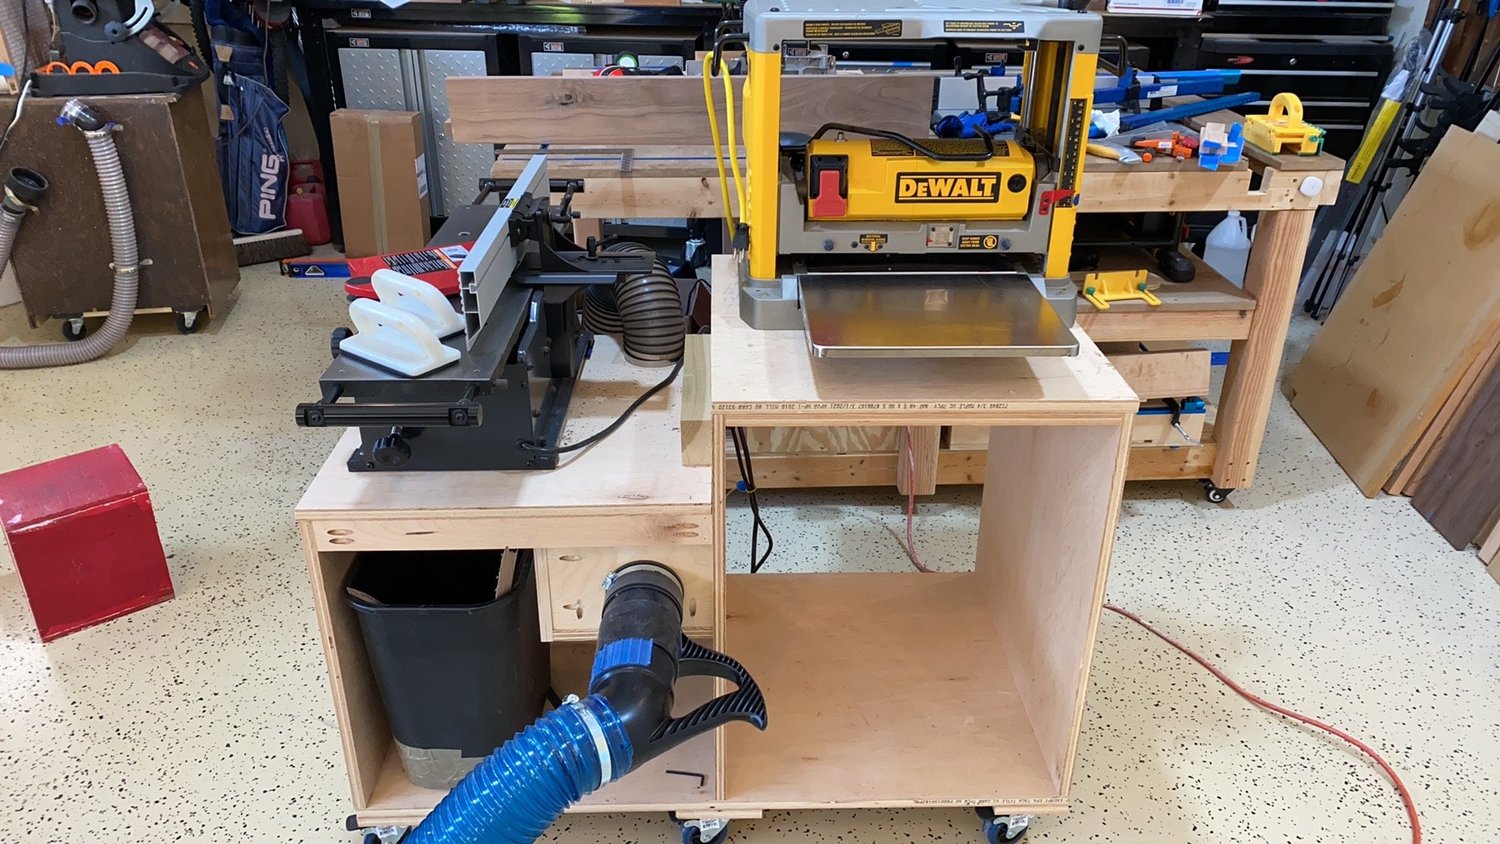 The Carmichael Workshop: Make a Mobile Planer Stand with Dust Collection